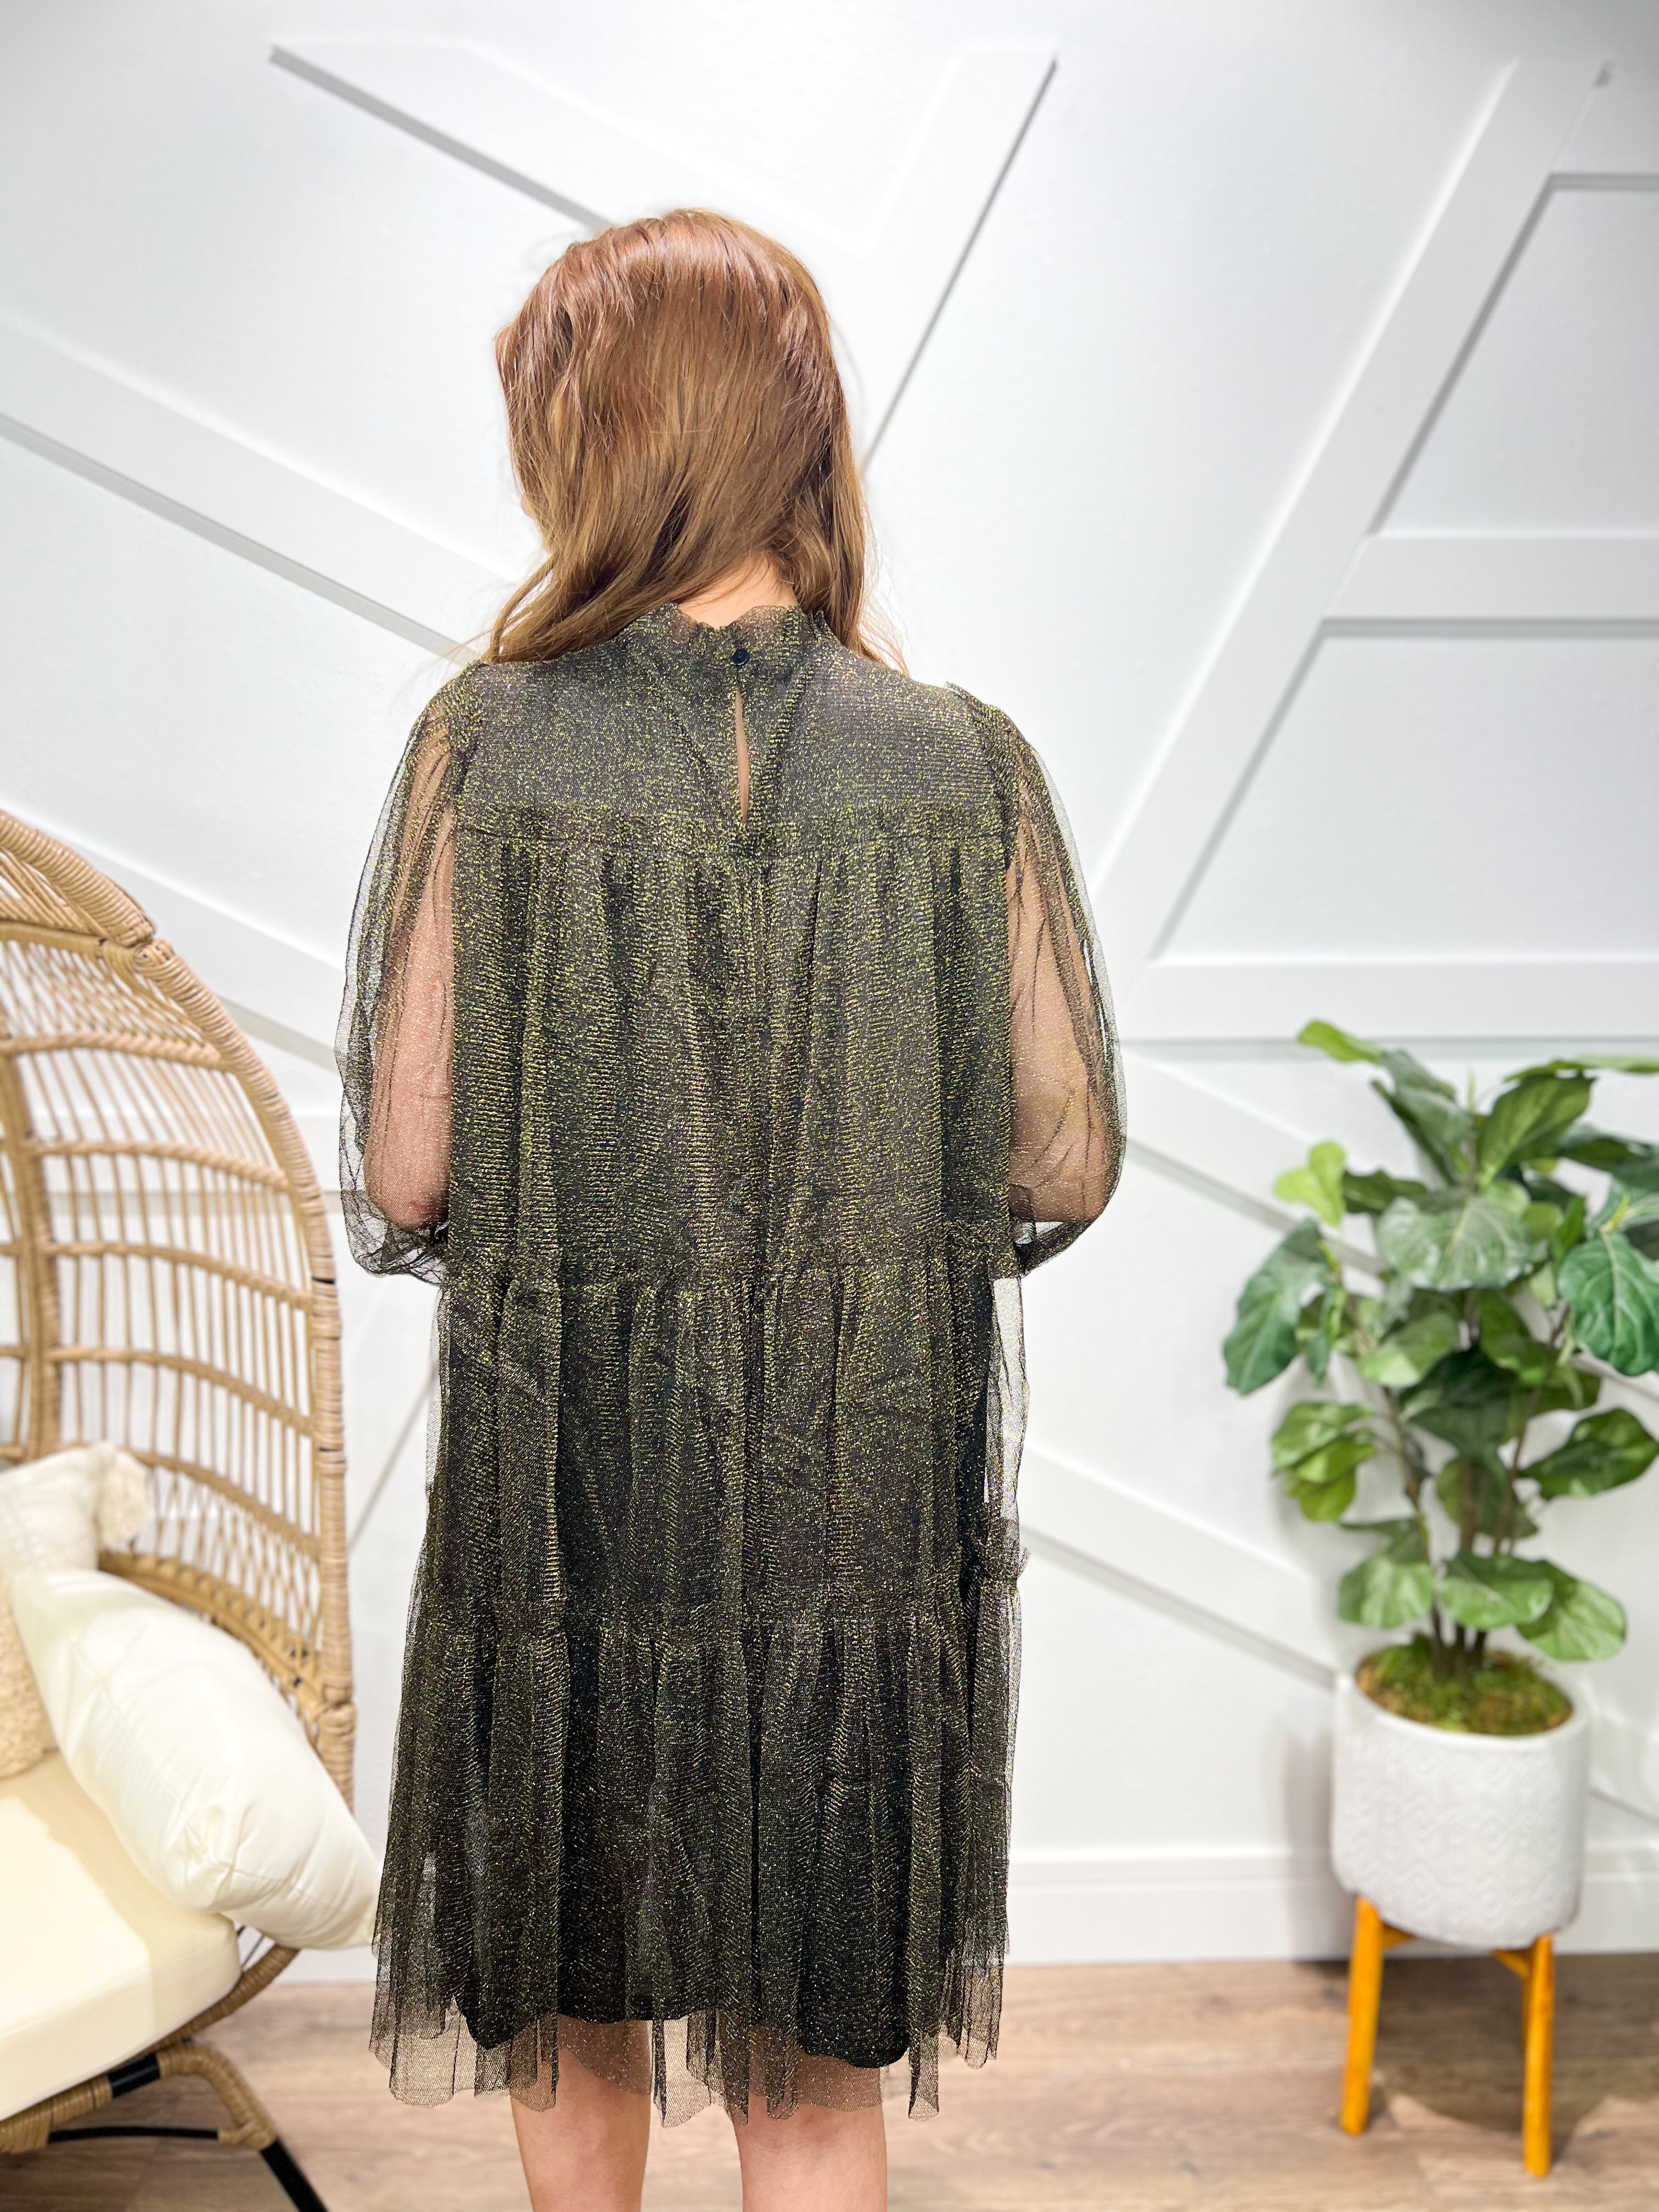 Twinkling Dress-230 Dresses/Jumpsuits/Rompers-Jodifl-Heathered Boho Boutique, Women's Fashion and Accessories in Palmetto, FL